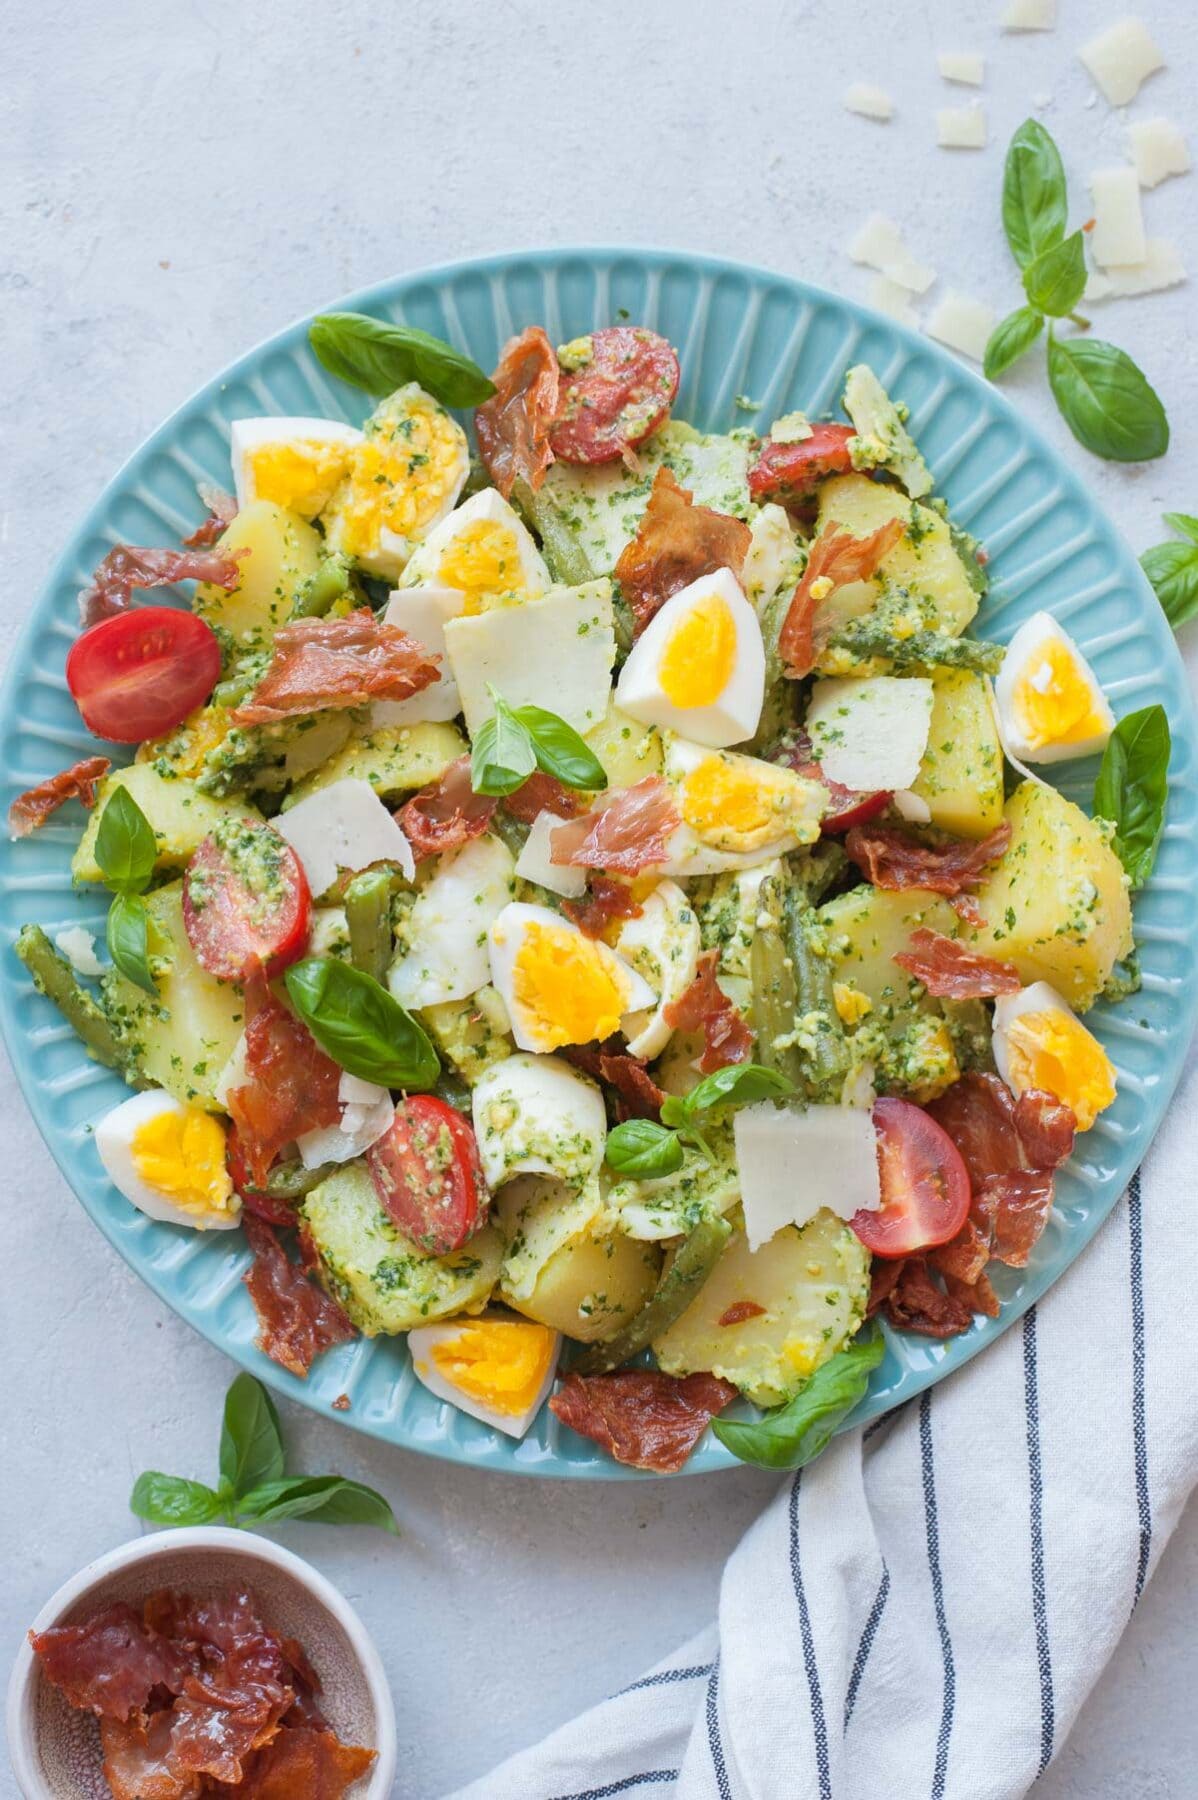 Pesto potato salad with eggs, green, beans, cherry tomatoes on a blue plate.